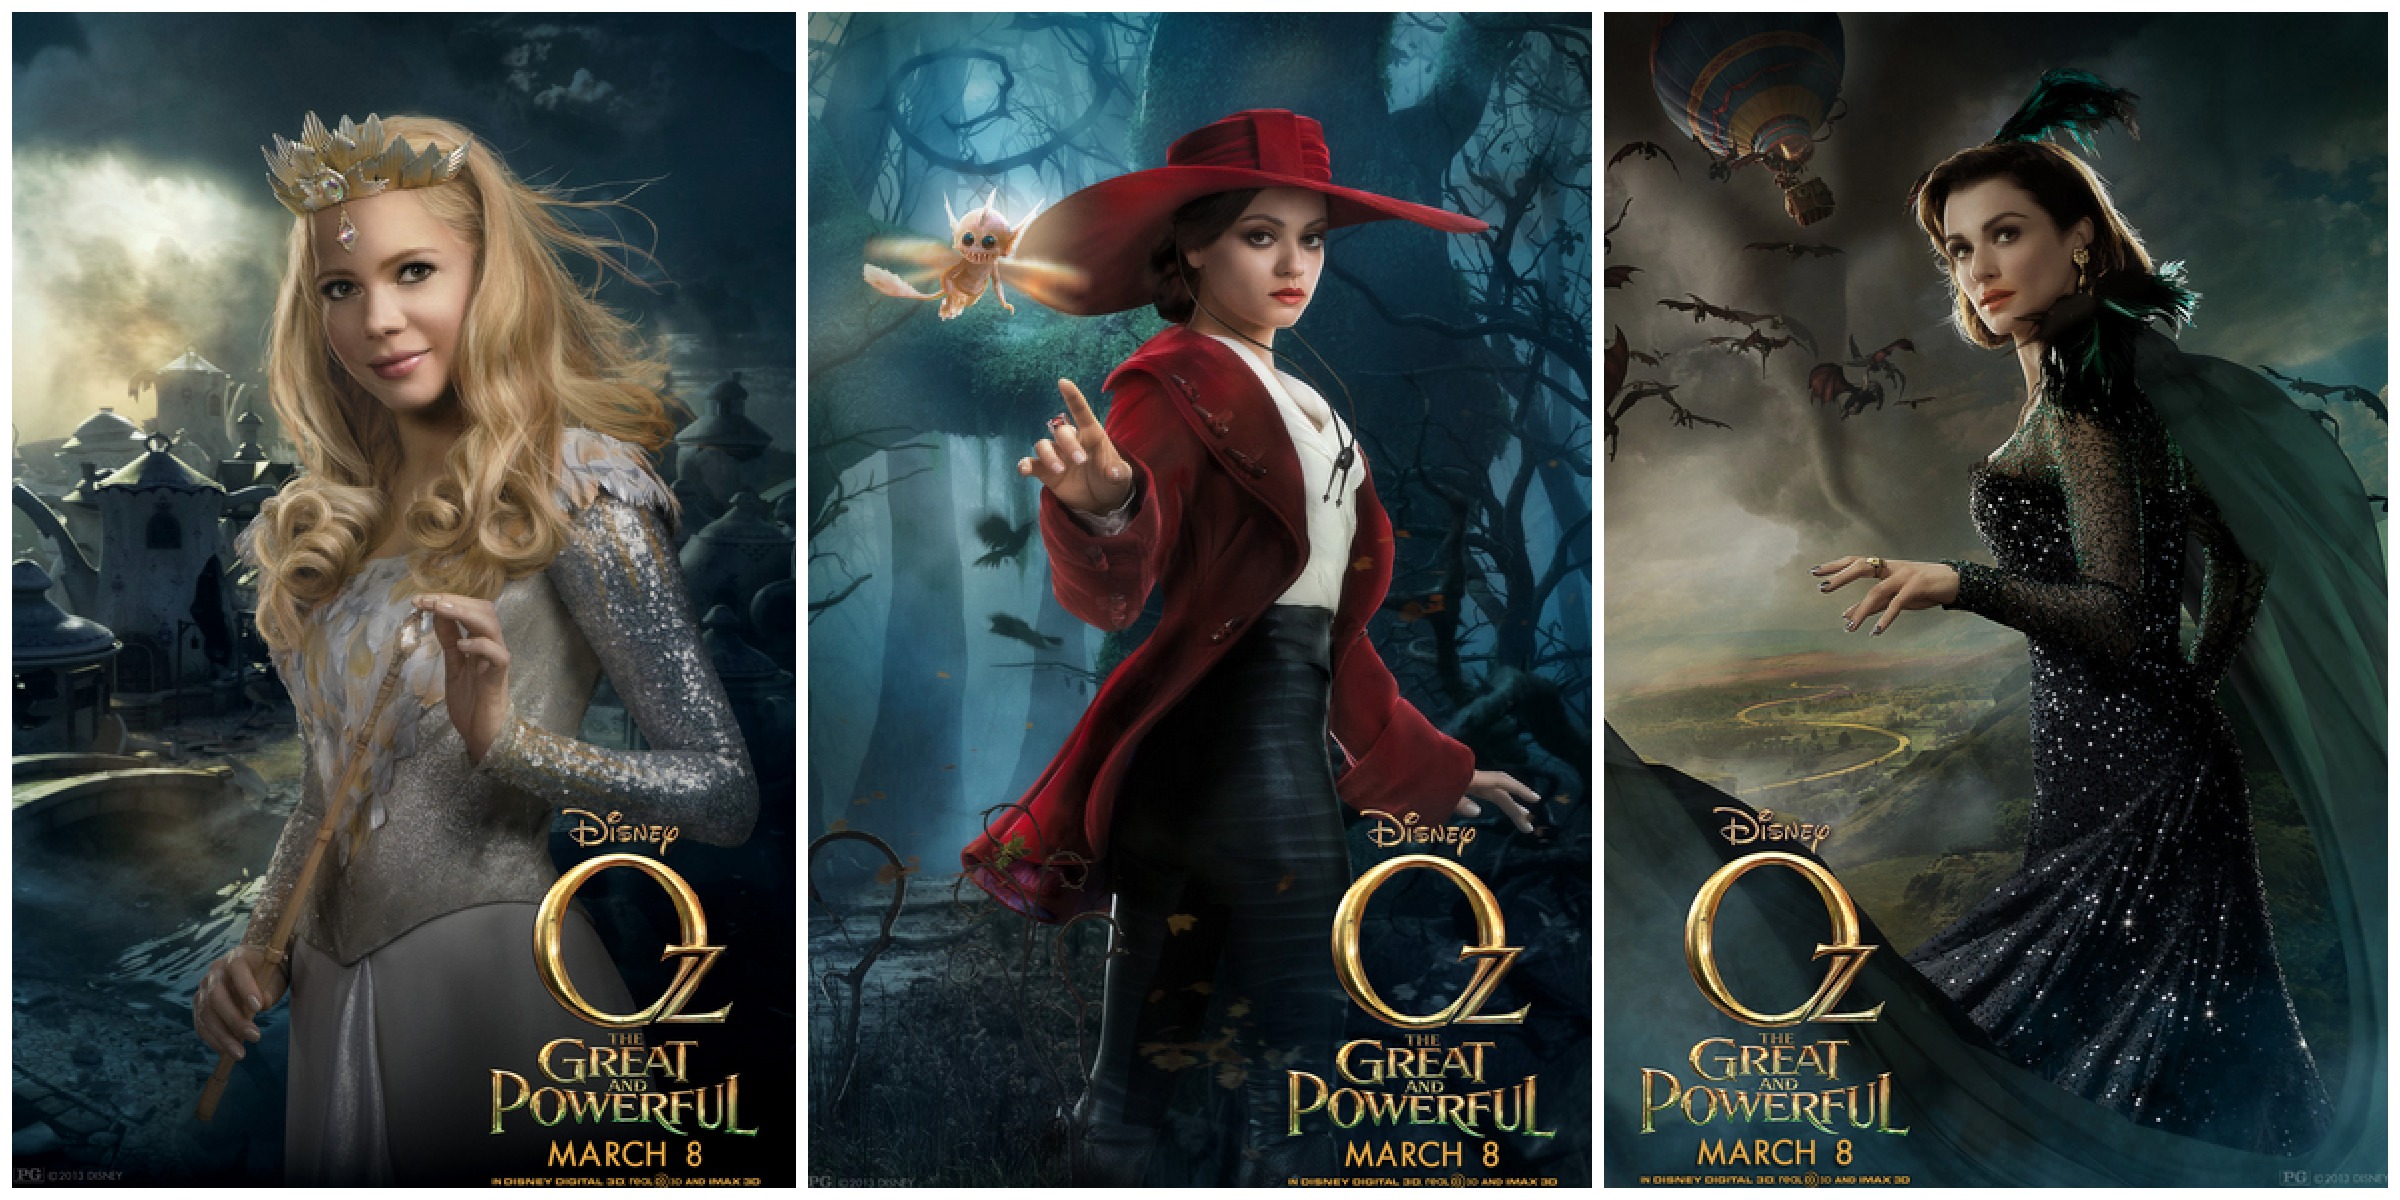 oz the great and powerful character posters